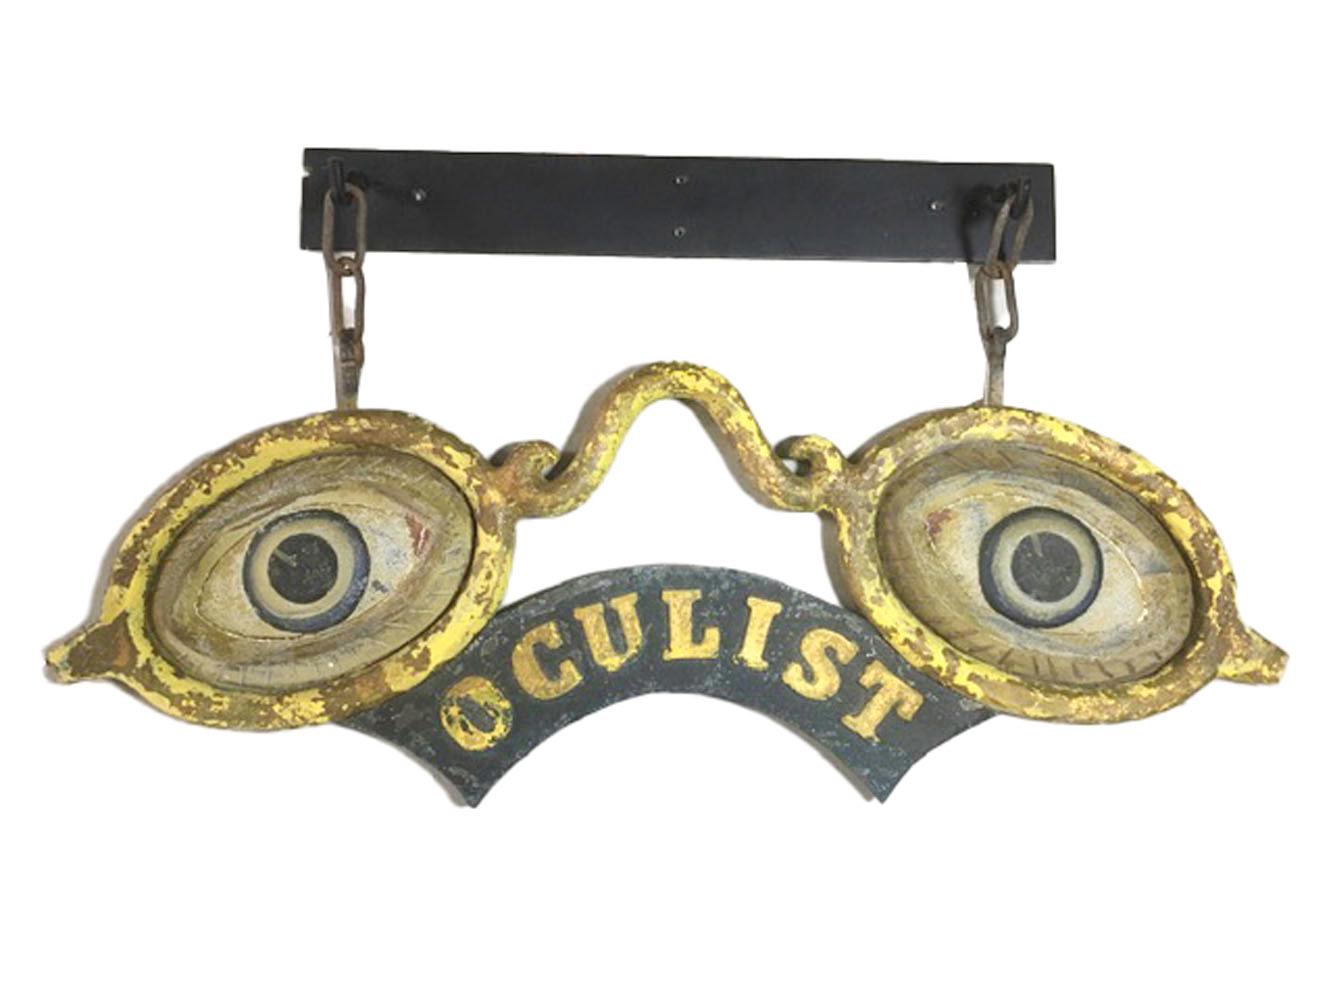 Antique cast iron and zinc trade sign in the form of a pair of gilded cast iron spectacles with painted cast zinc eyes above an arched banner reading 